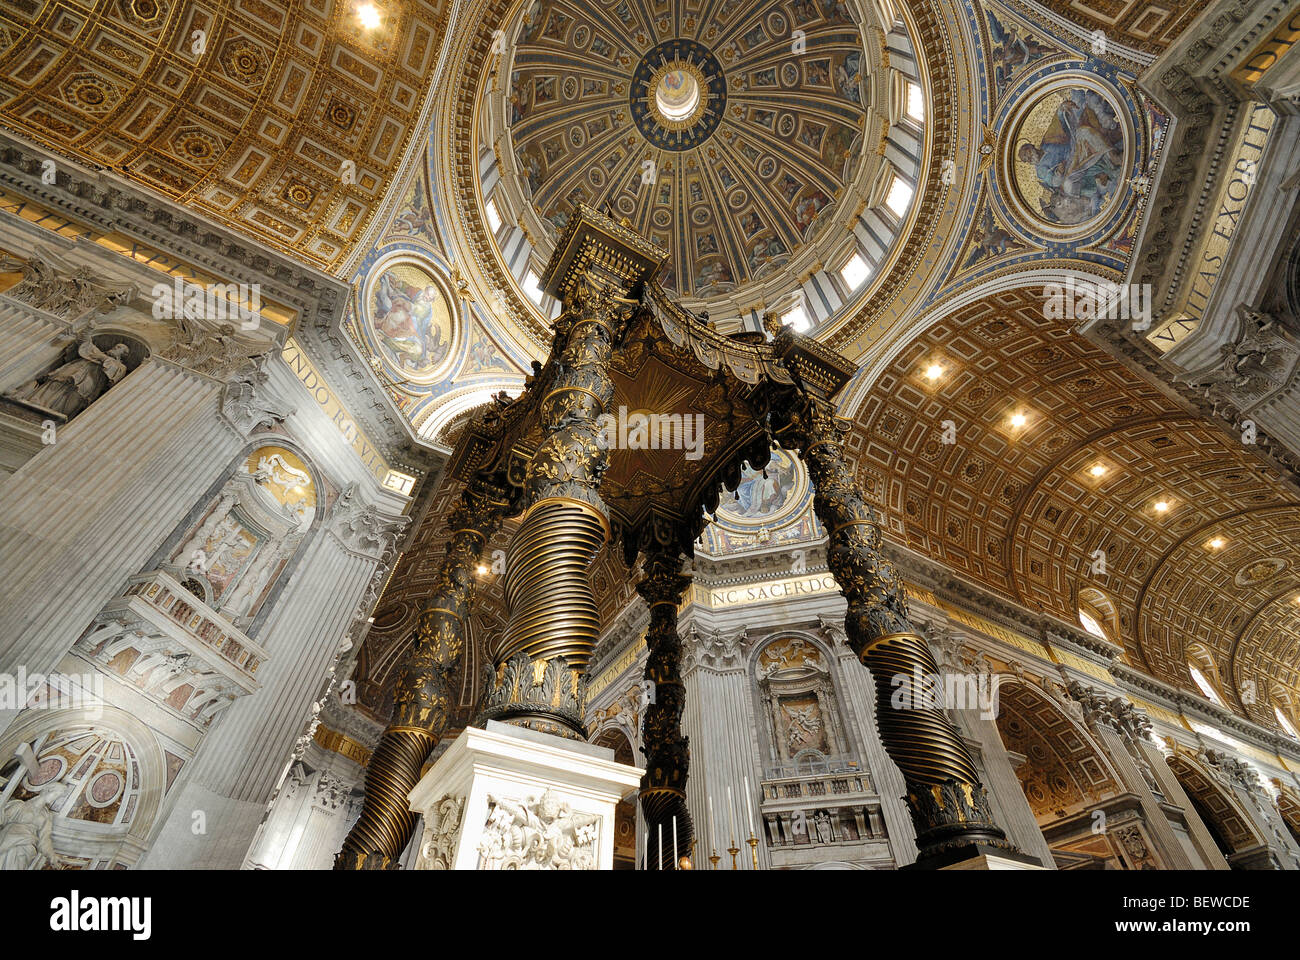 Berninis baldachin at St. Peters Basilica, Rome, Vatican City, view from below Stock Photo